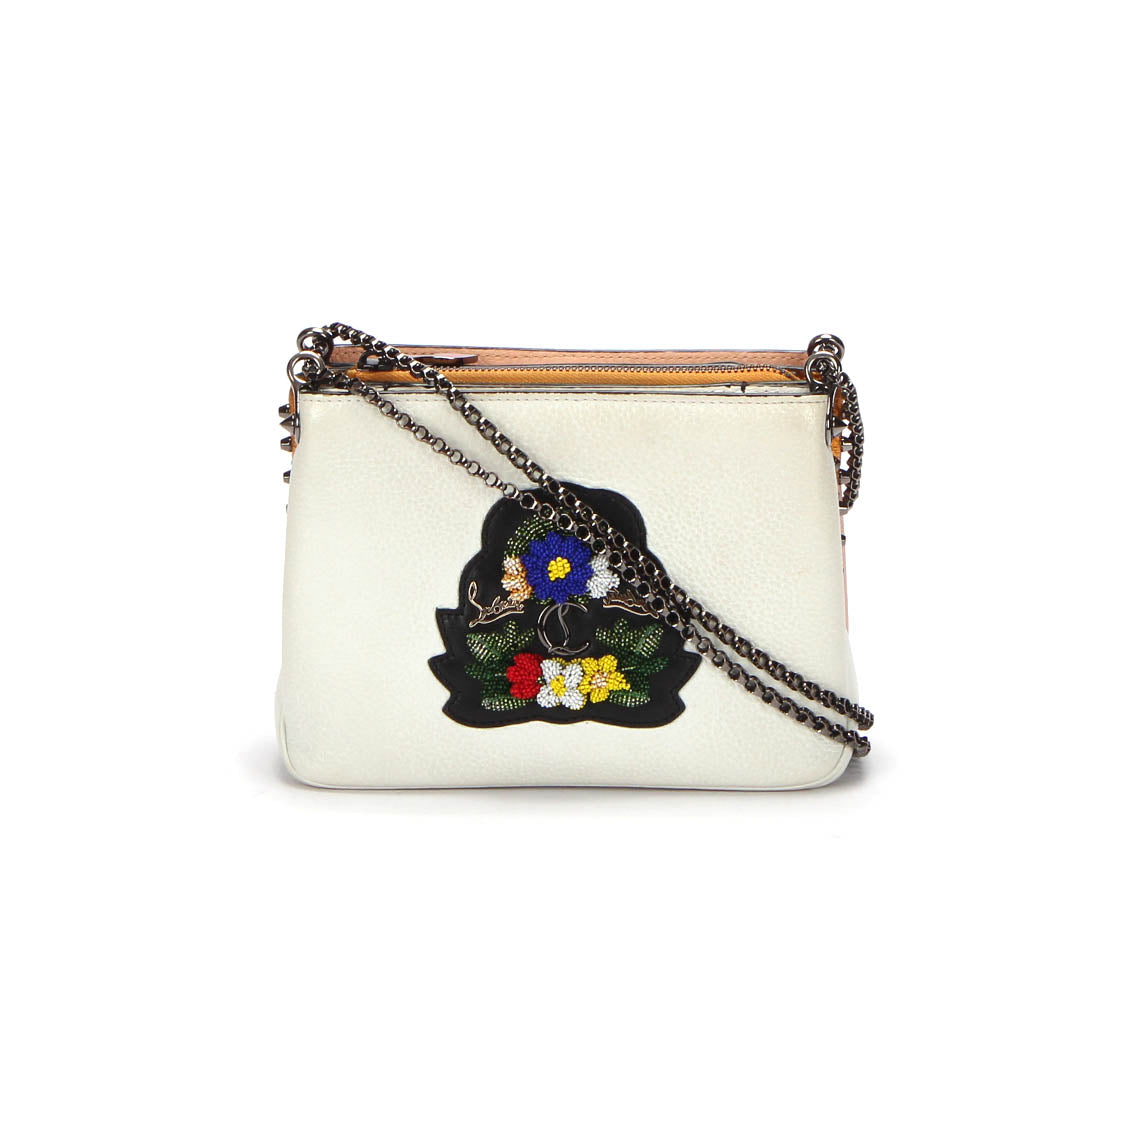 Embellished Leather Chain Crossbody Bag